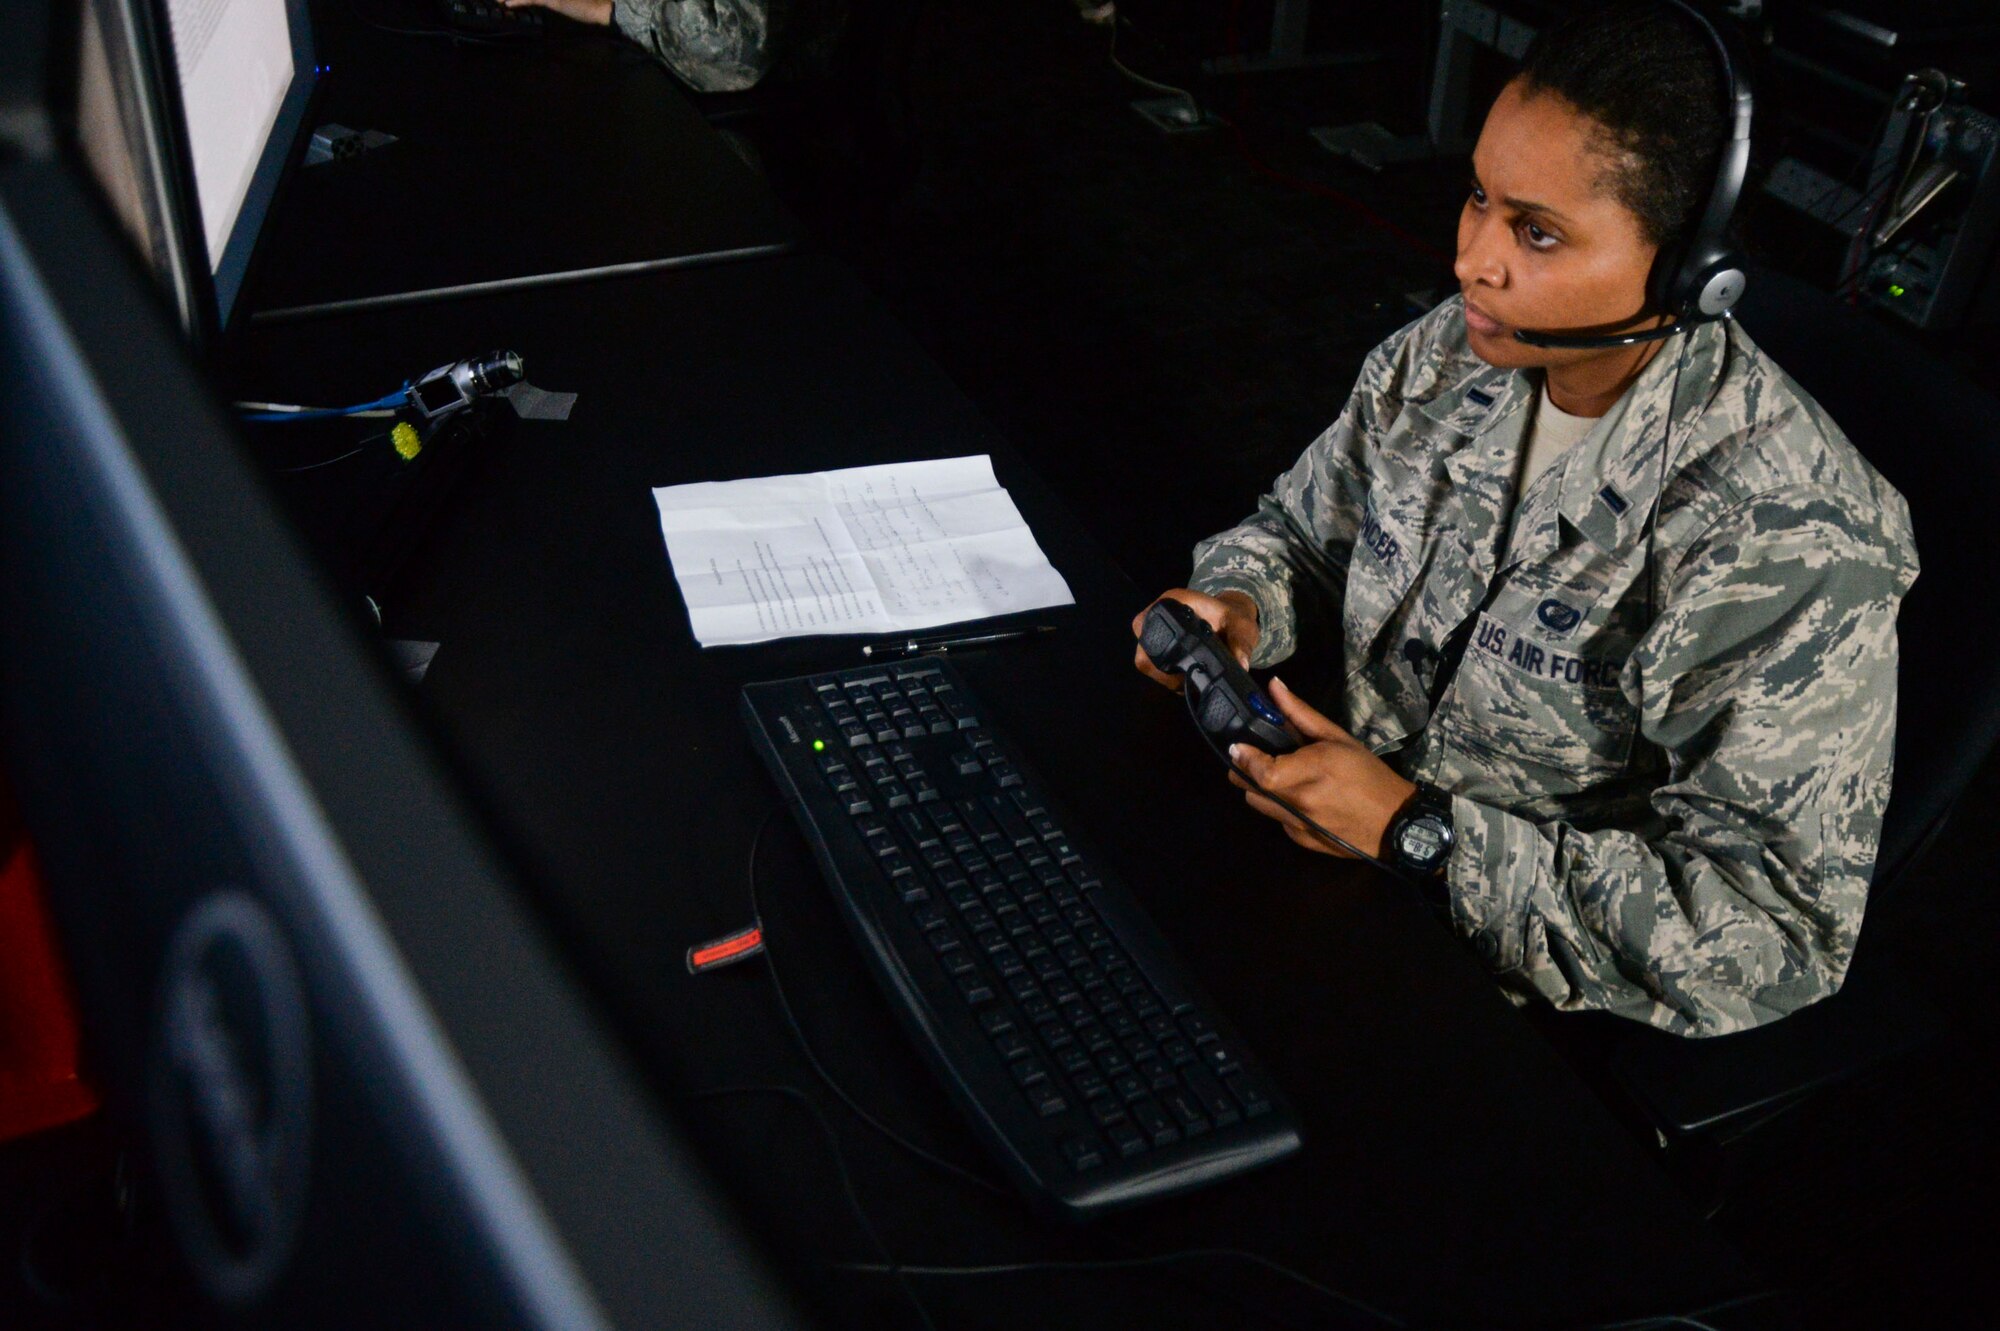 First Lt. Kristin Spencer watches a video for suspicious behavior during a demonstration of a new Enhanced Reporting, Narrative Event Streaming Tool developed by the Air Force Research Laboratory Oct. 15, 2014, at Wright-Patterson Air Force Base, Ohio. The program aims to make intelligence analyst’s jobs easier by streamlining some of their routine tasks, which could enable to them save more lives. Spencer is a 711th Human Performance Wing behavioral scientist. (U.S. Air Force photo/Wesley Farnsworth)